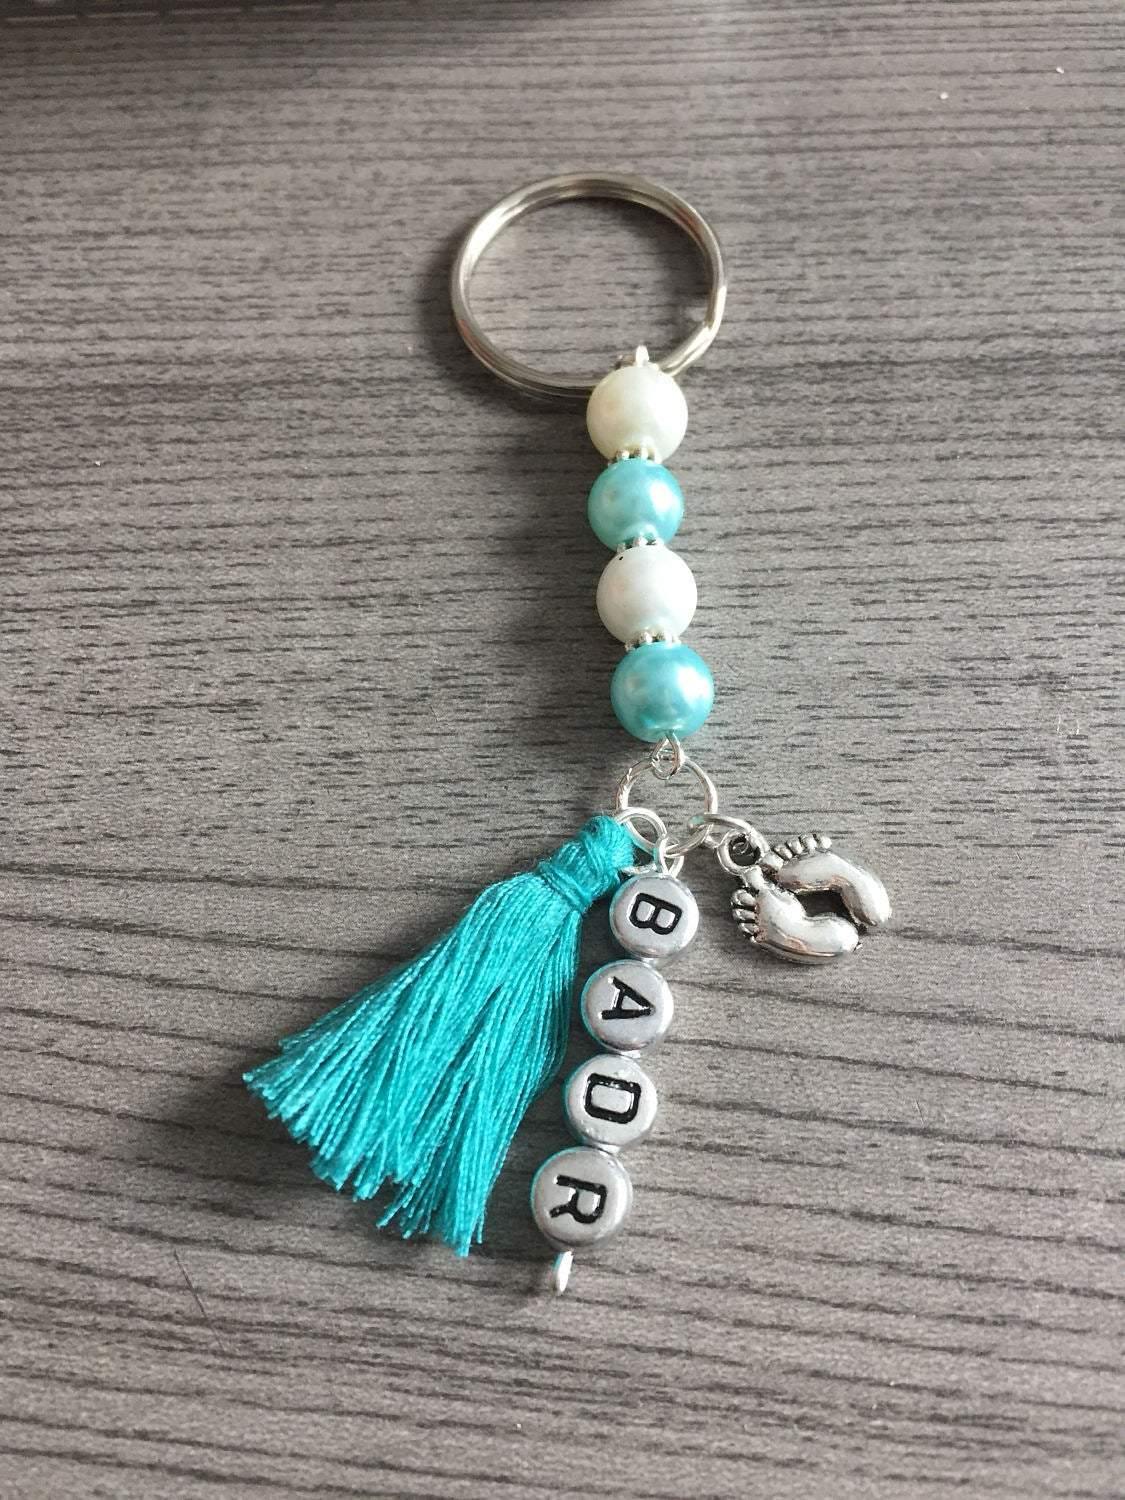 Personalized keychain - Unique Tasbihs & Gifts